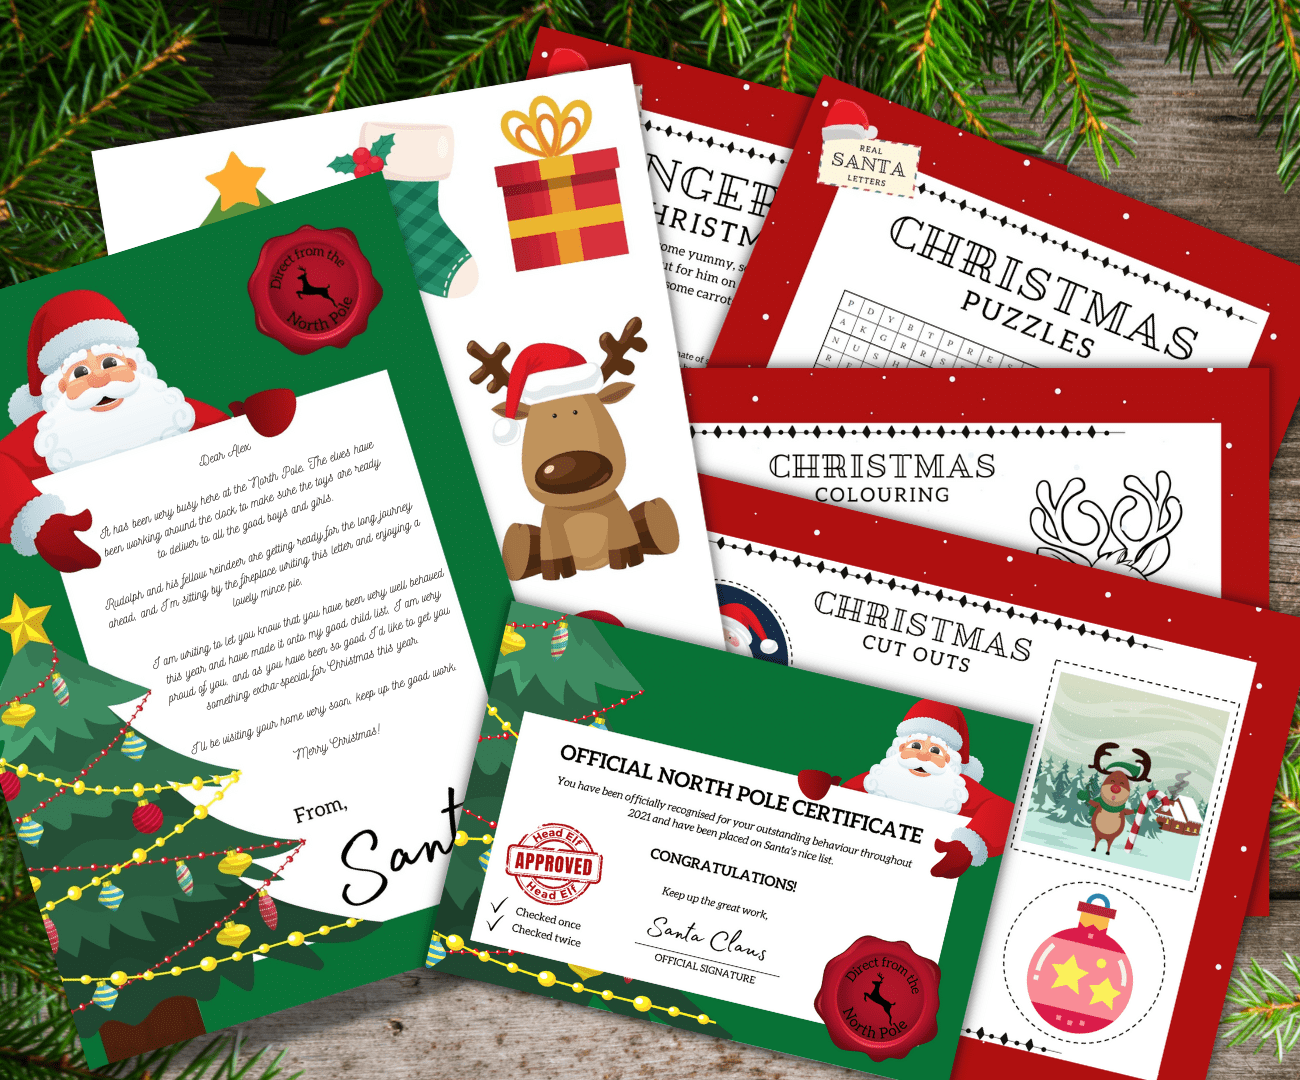 Personalised Santa Letter, Certificate, Stickers & Activity Sheets